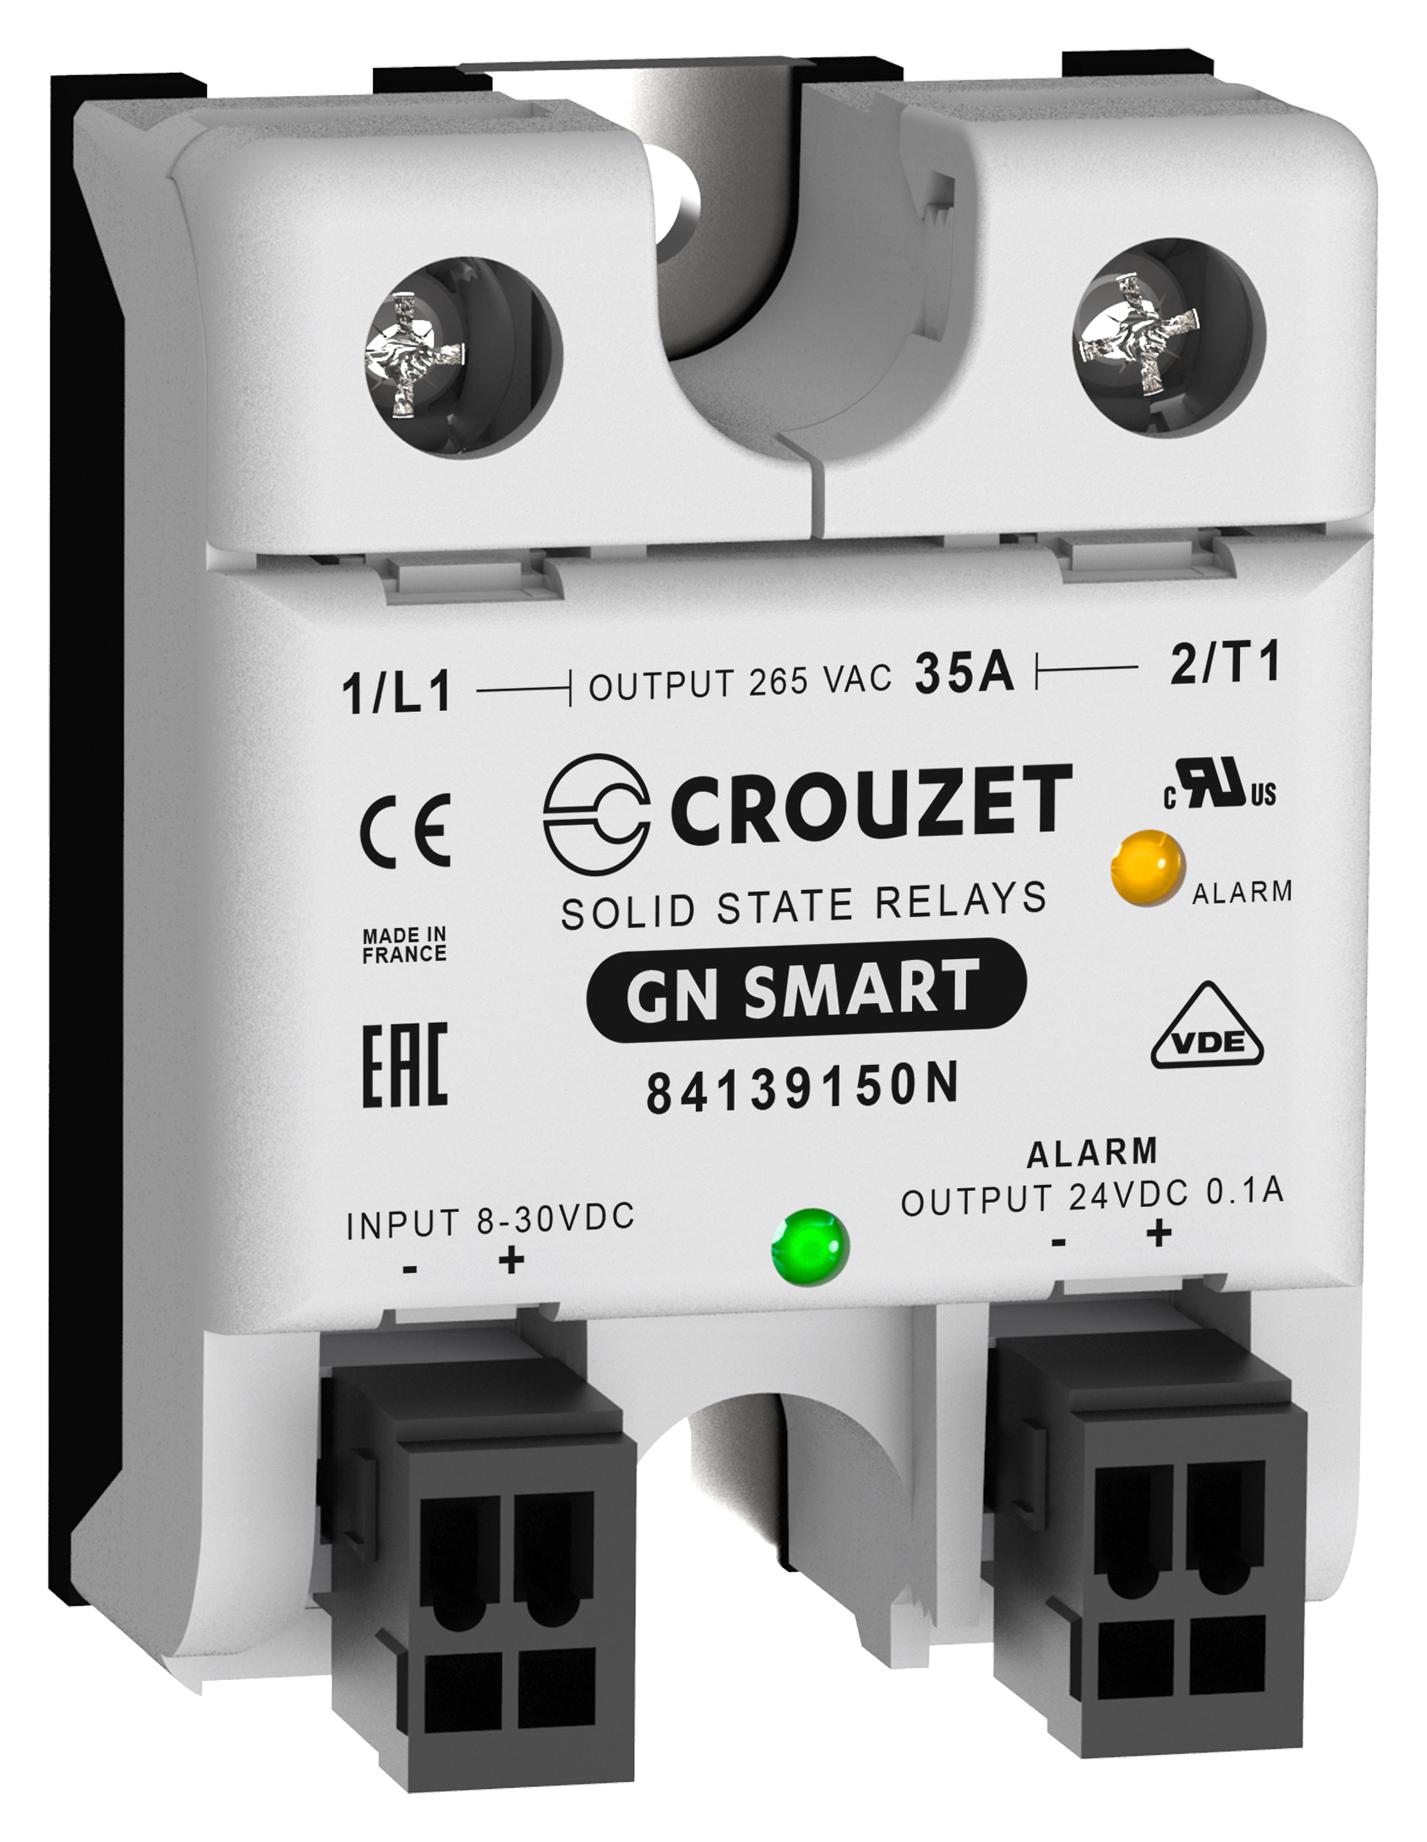 84139150N SOLID STATE RELAY, 35A, 50-265VAC/PANEL CROUZET